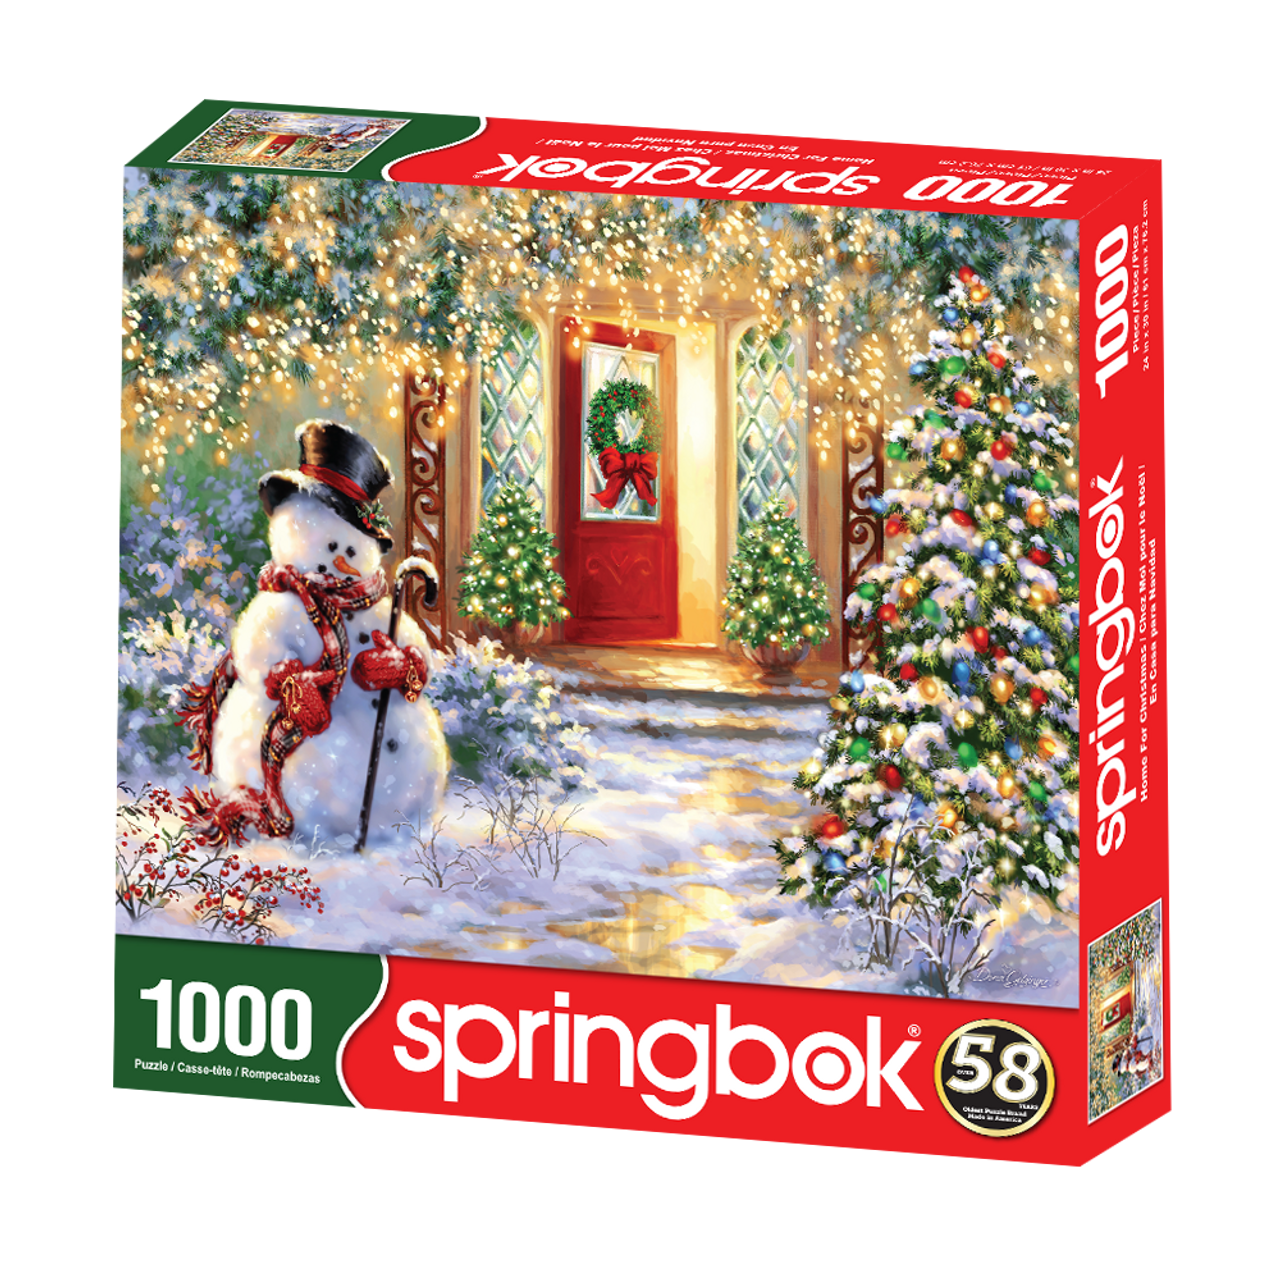 Home for Christmas 1000 Piece Jigsaw Puzzle - Allied Products Corp  Wholesale Website